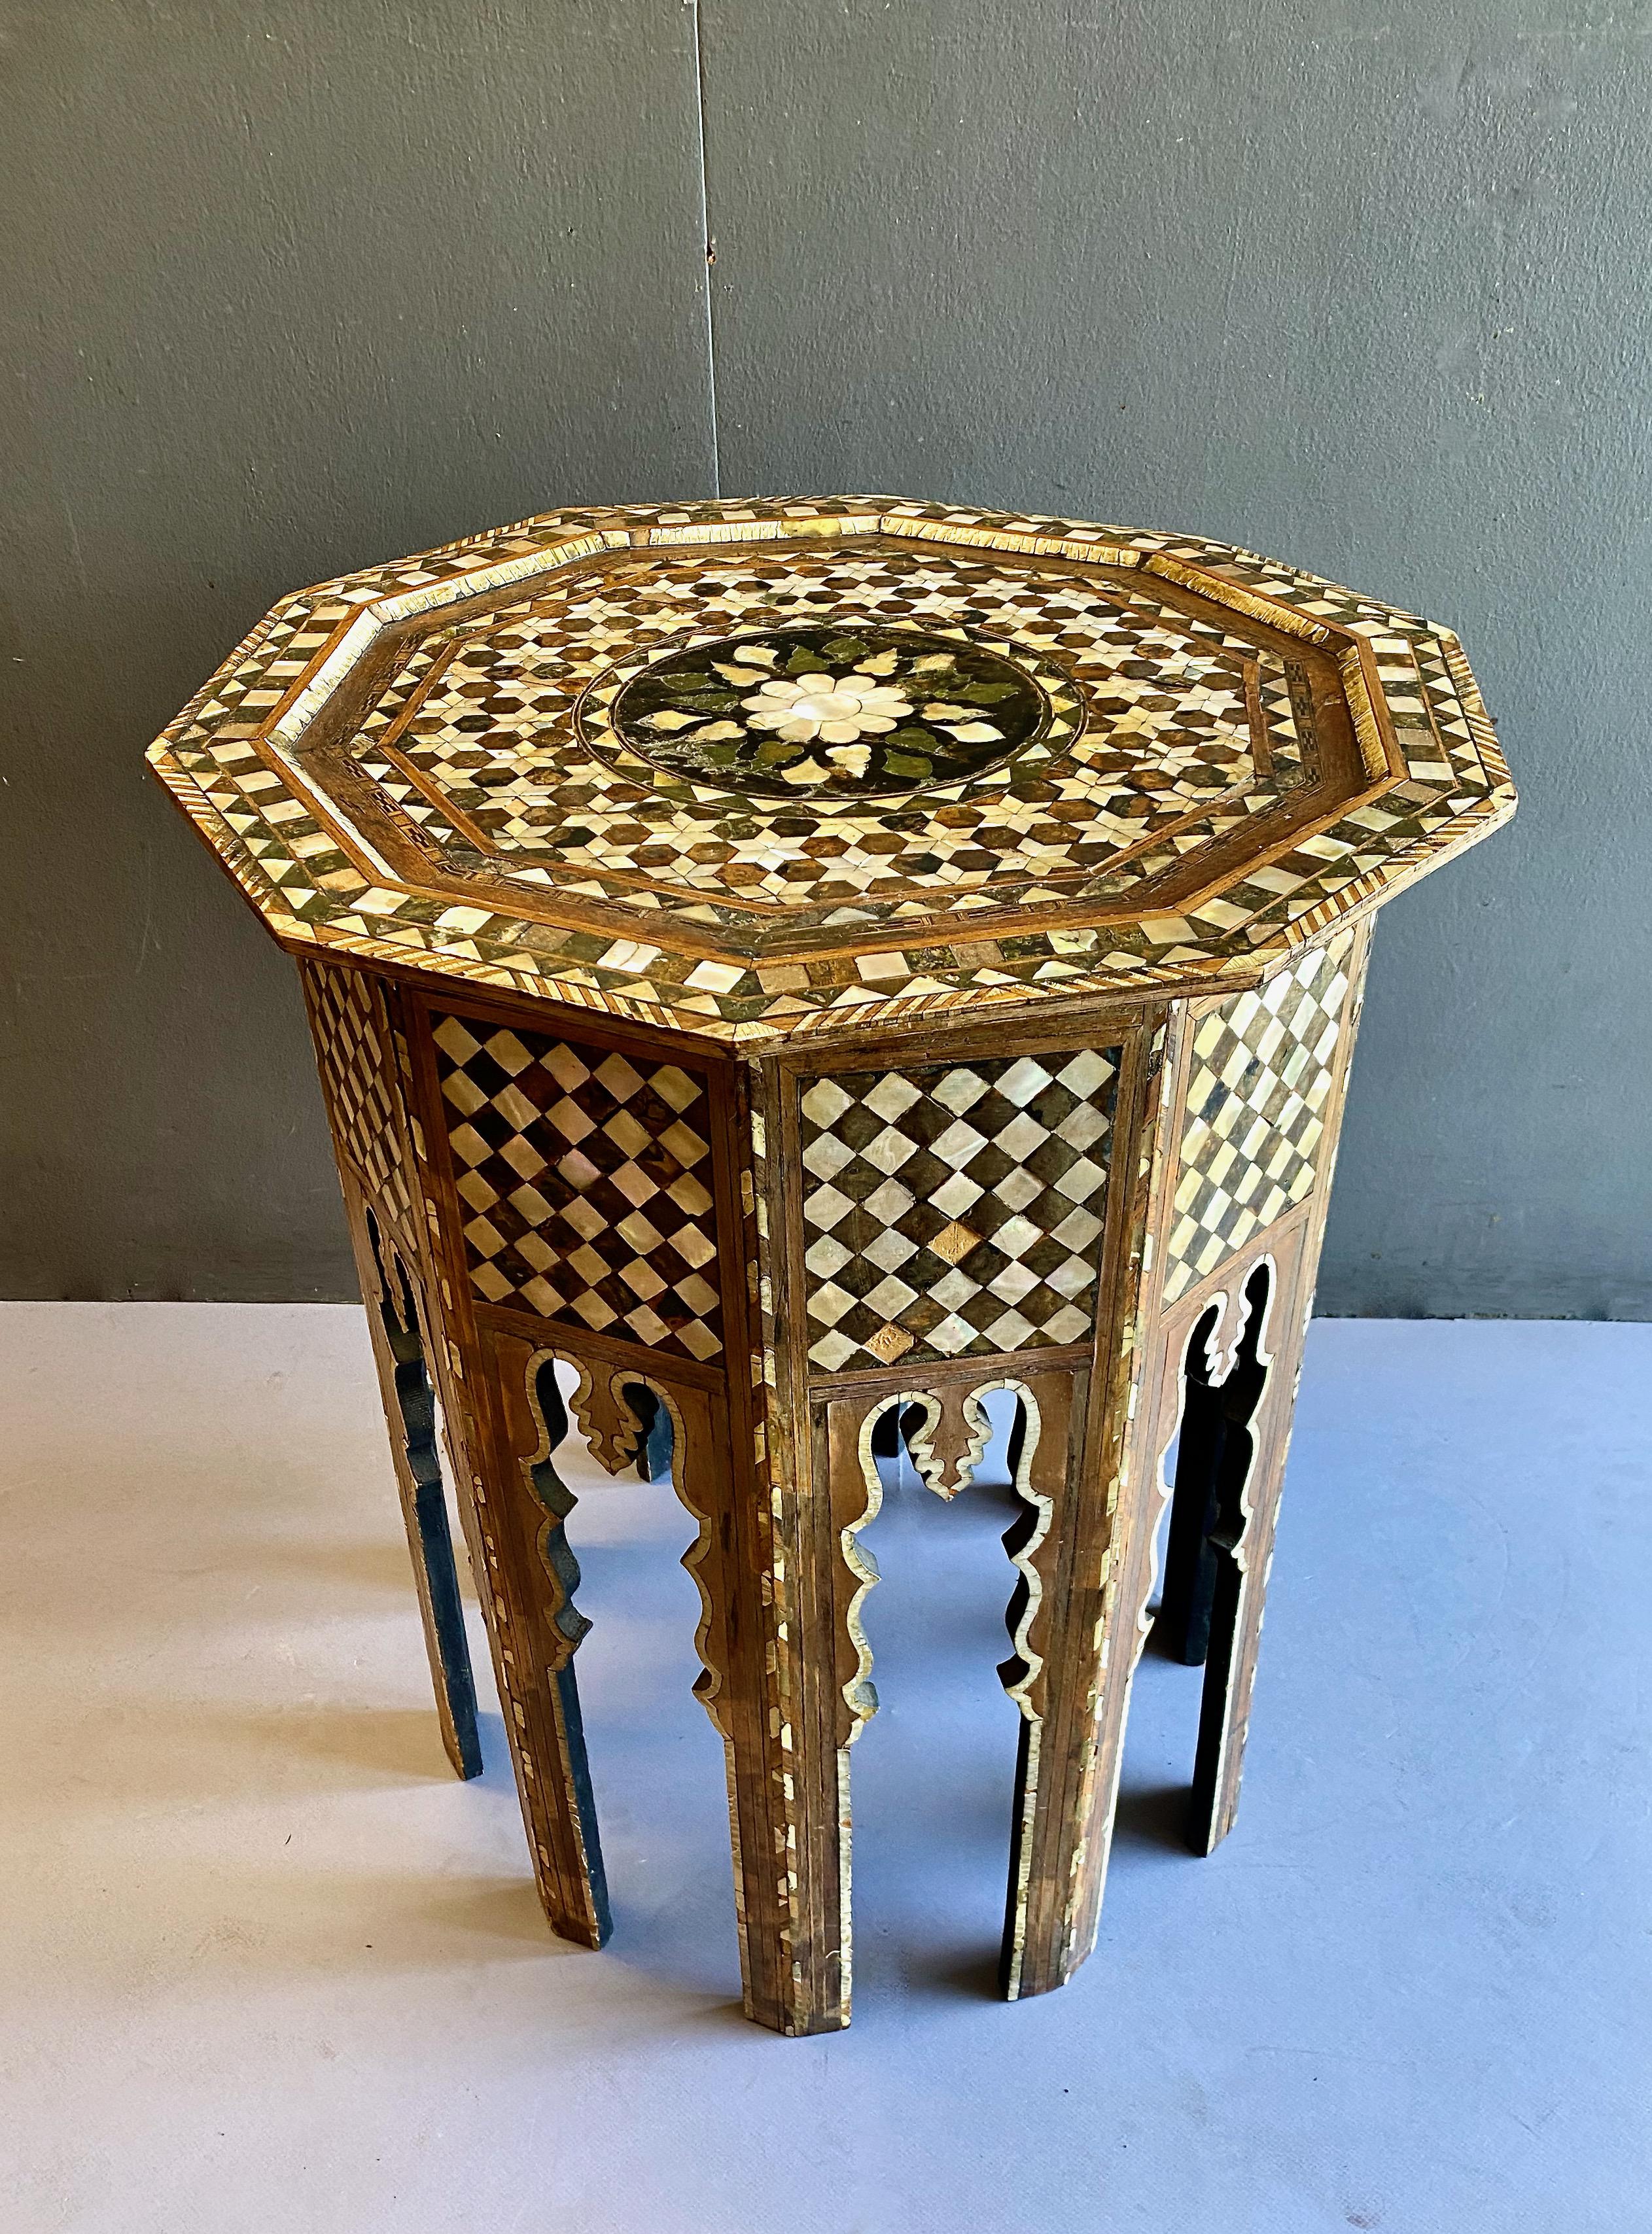 Shell Syrian Inlaid Table, 19th Century For Sale